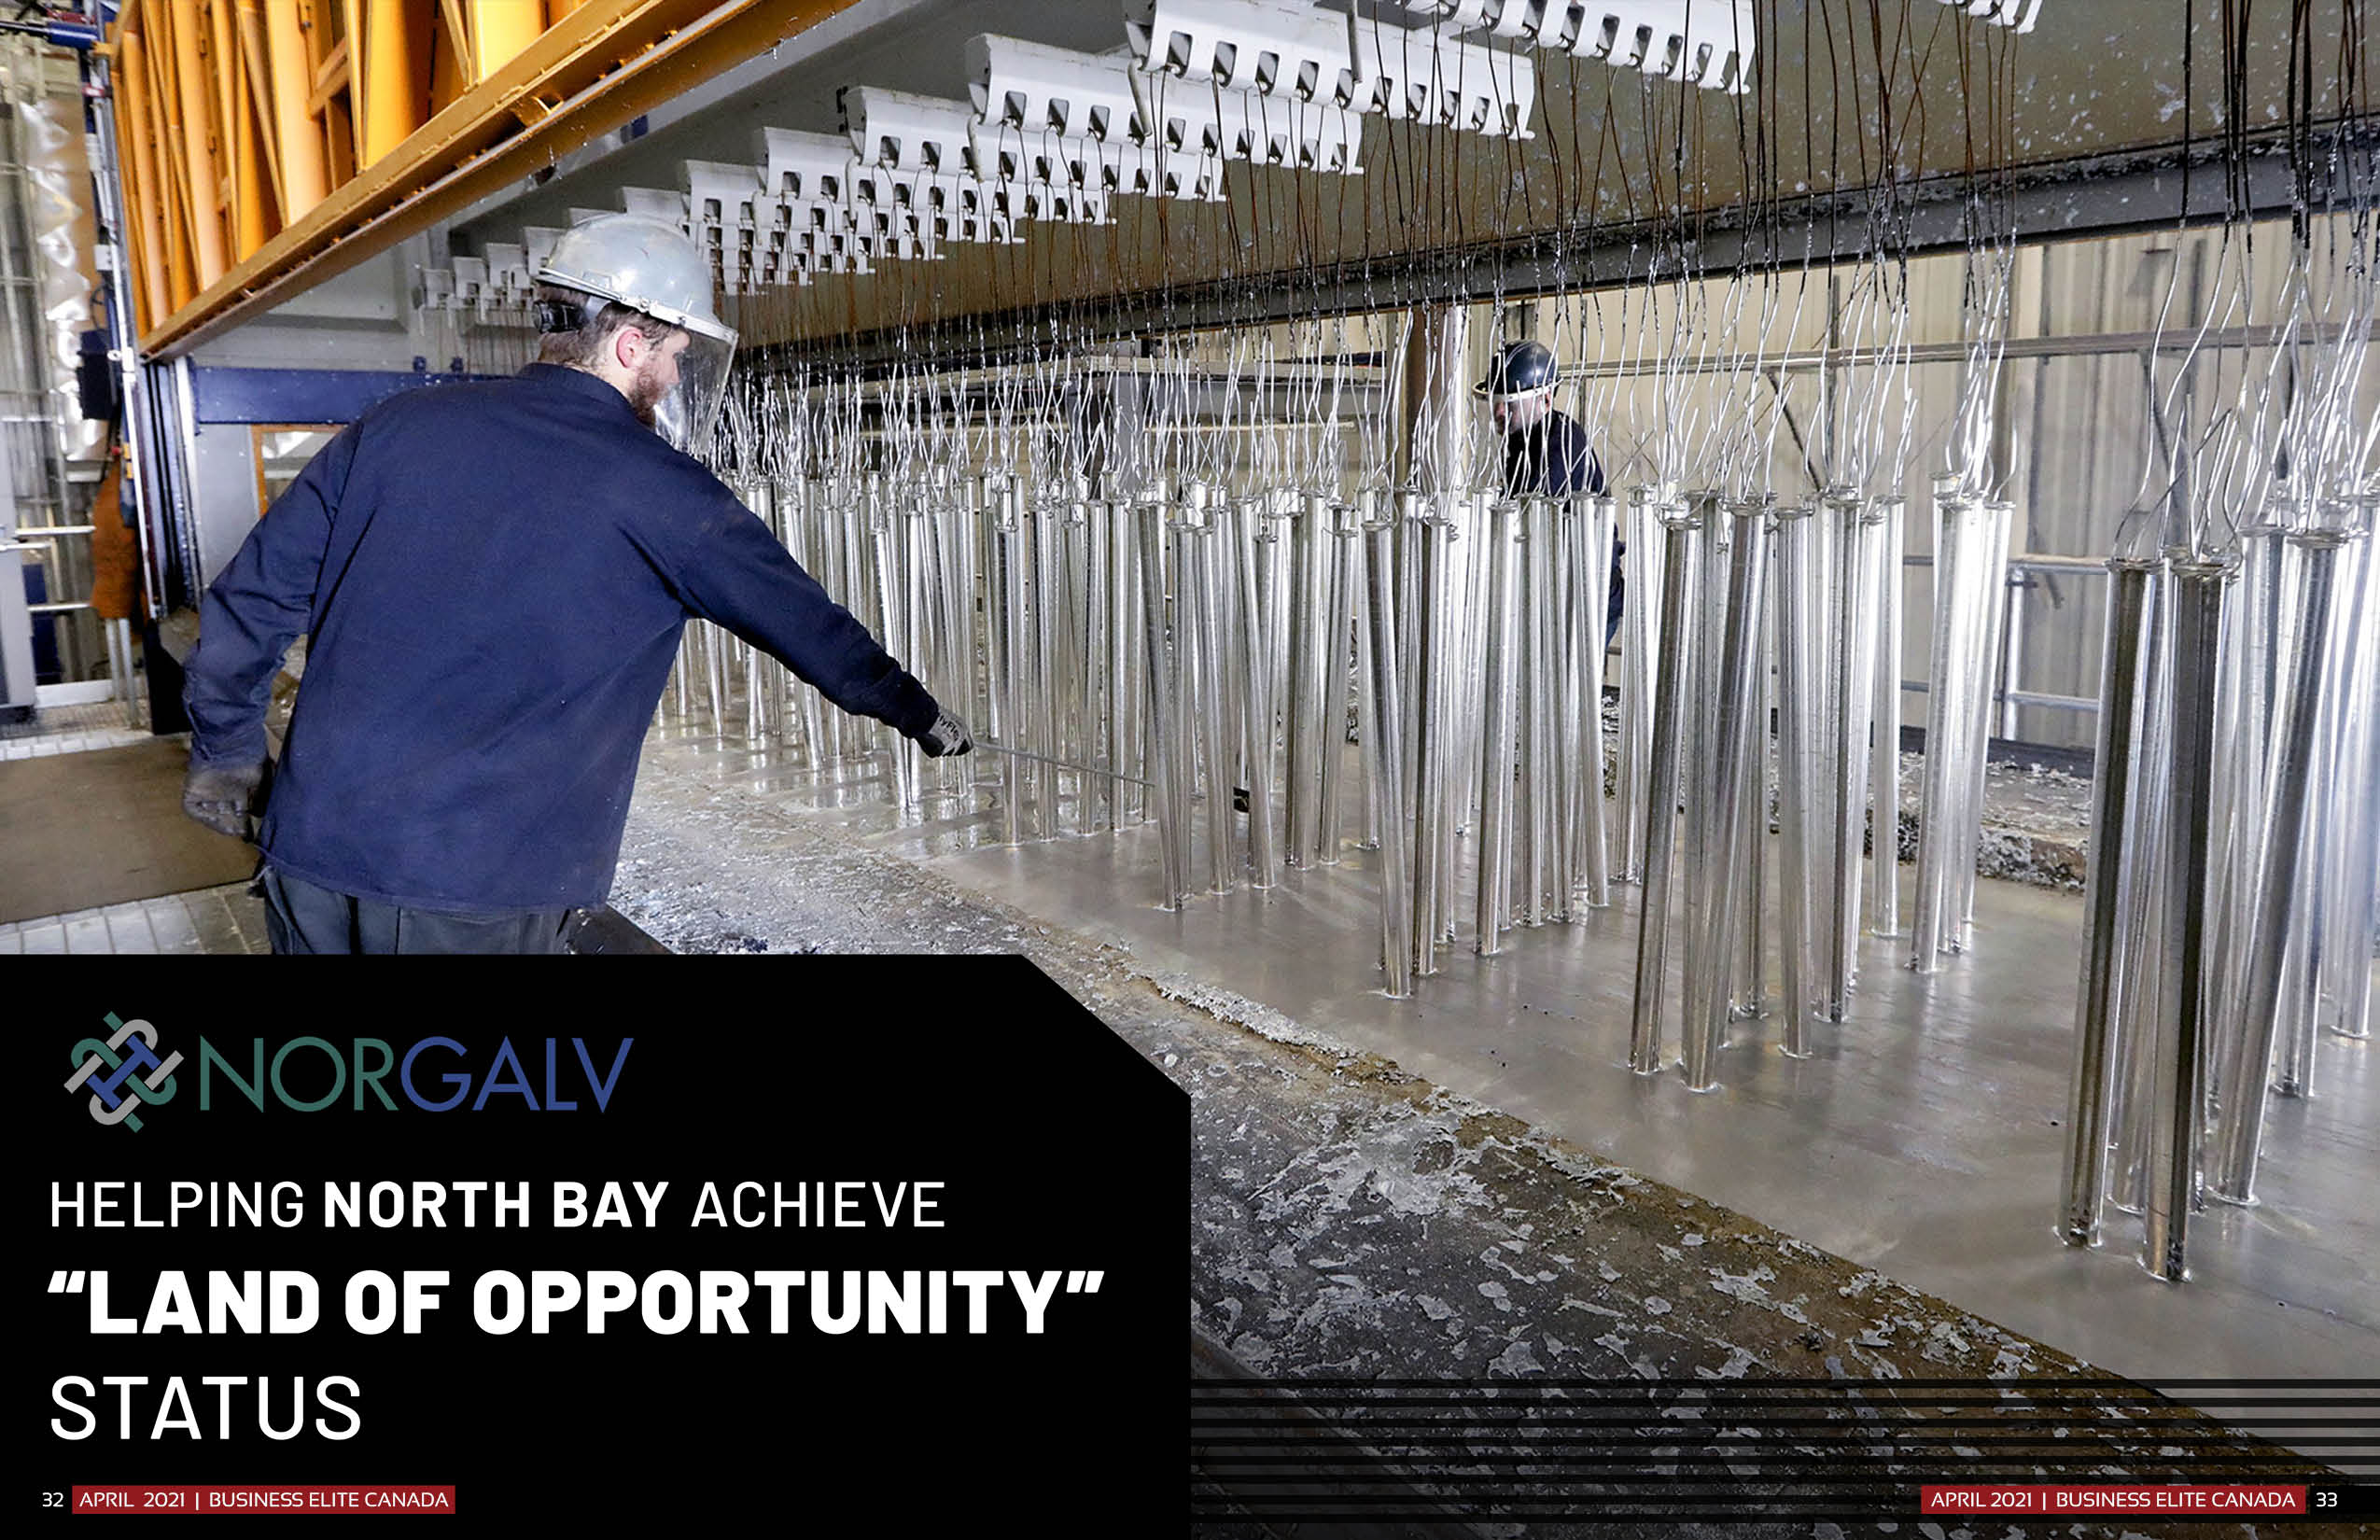 Norgalv - Helping North Bay Achieve ‘Land of Opportunity’ Status